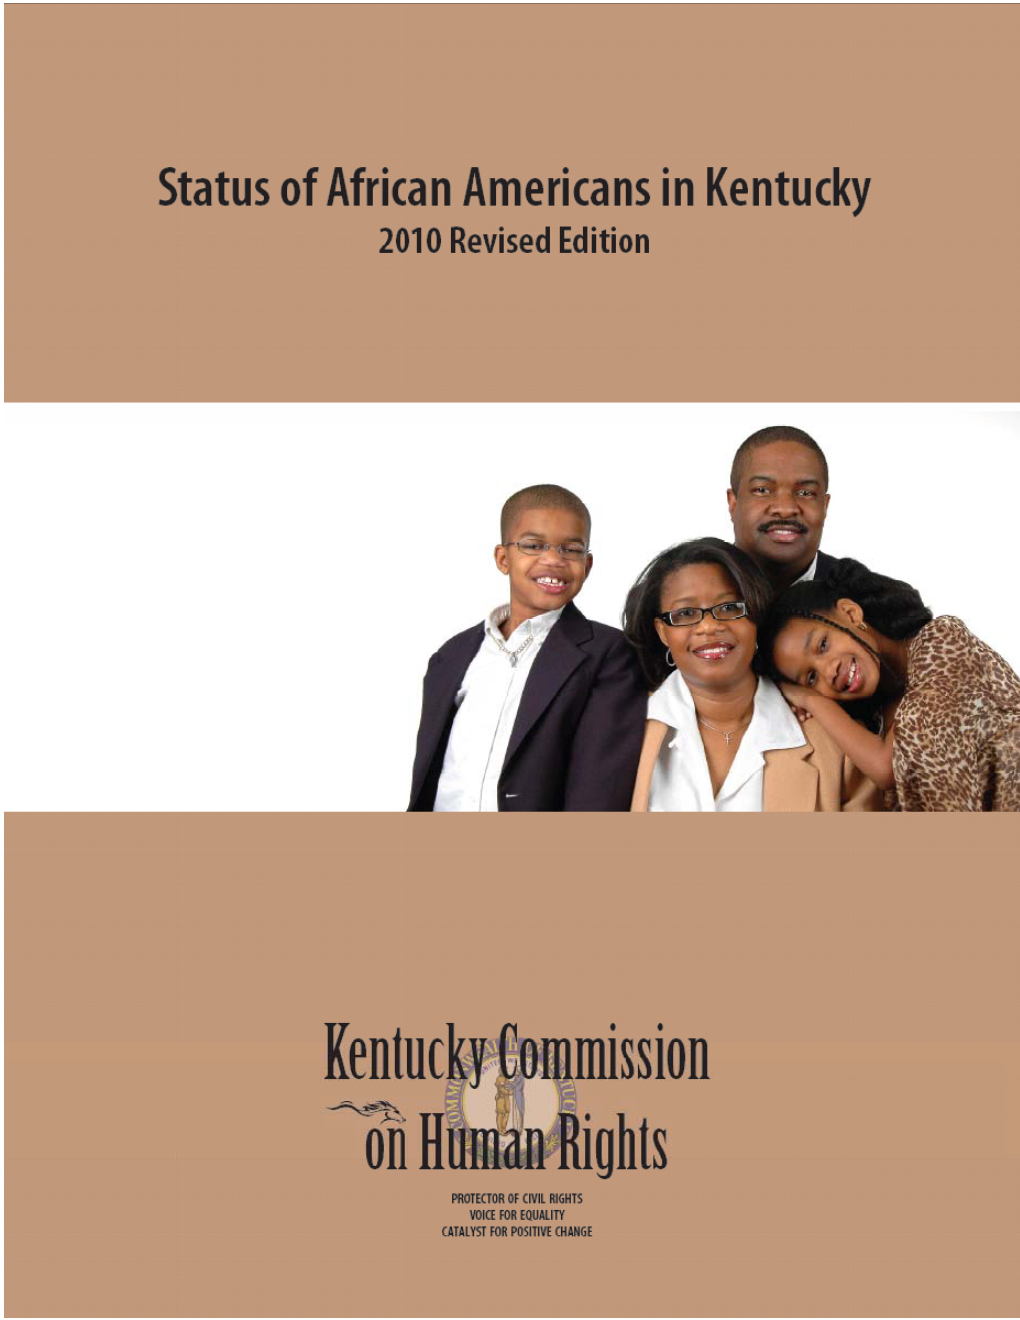 Status of African Americans in Kentucky 2010 Revised Edition